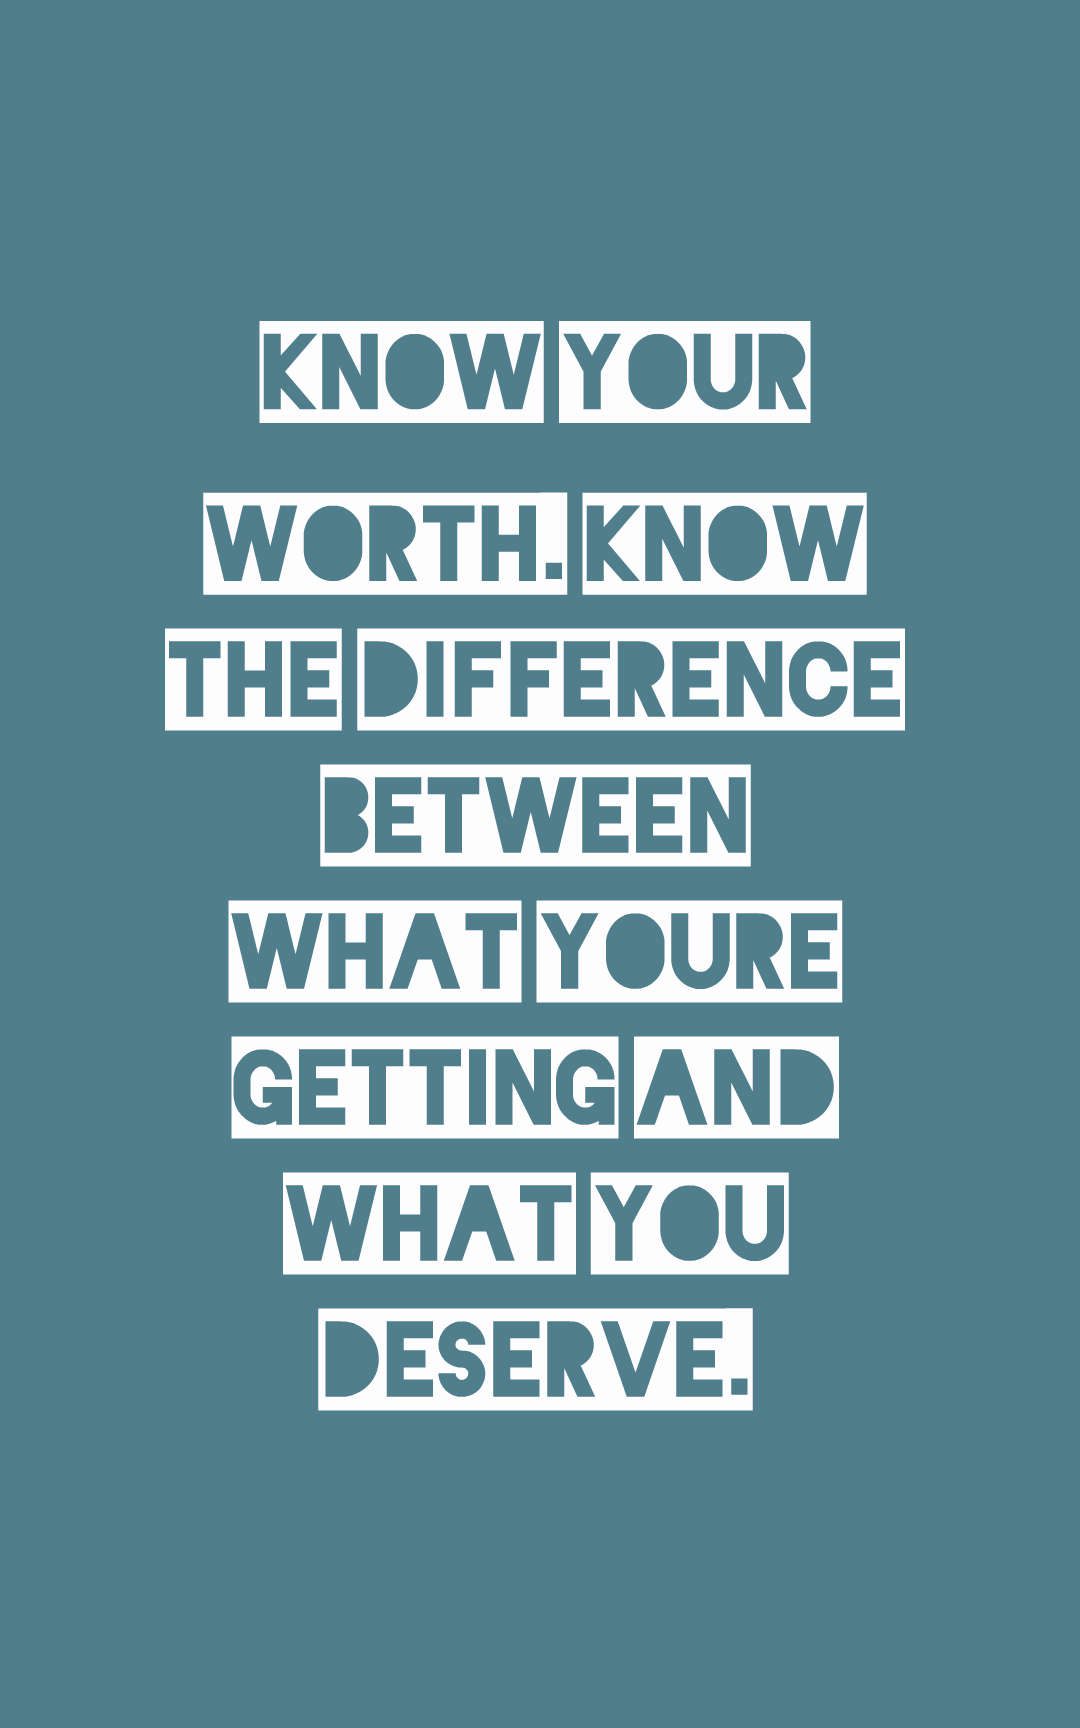 Know your worth. Know the difference between what you’re getting and what you deserve.